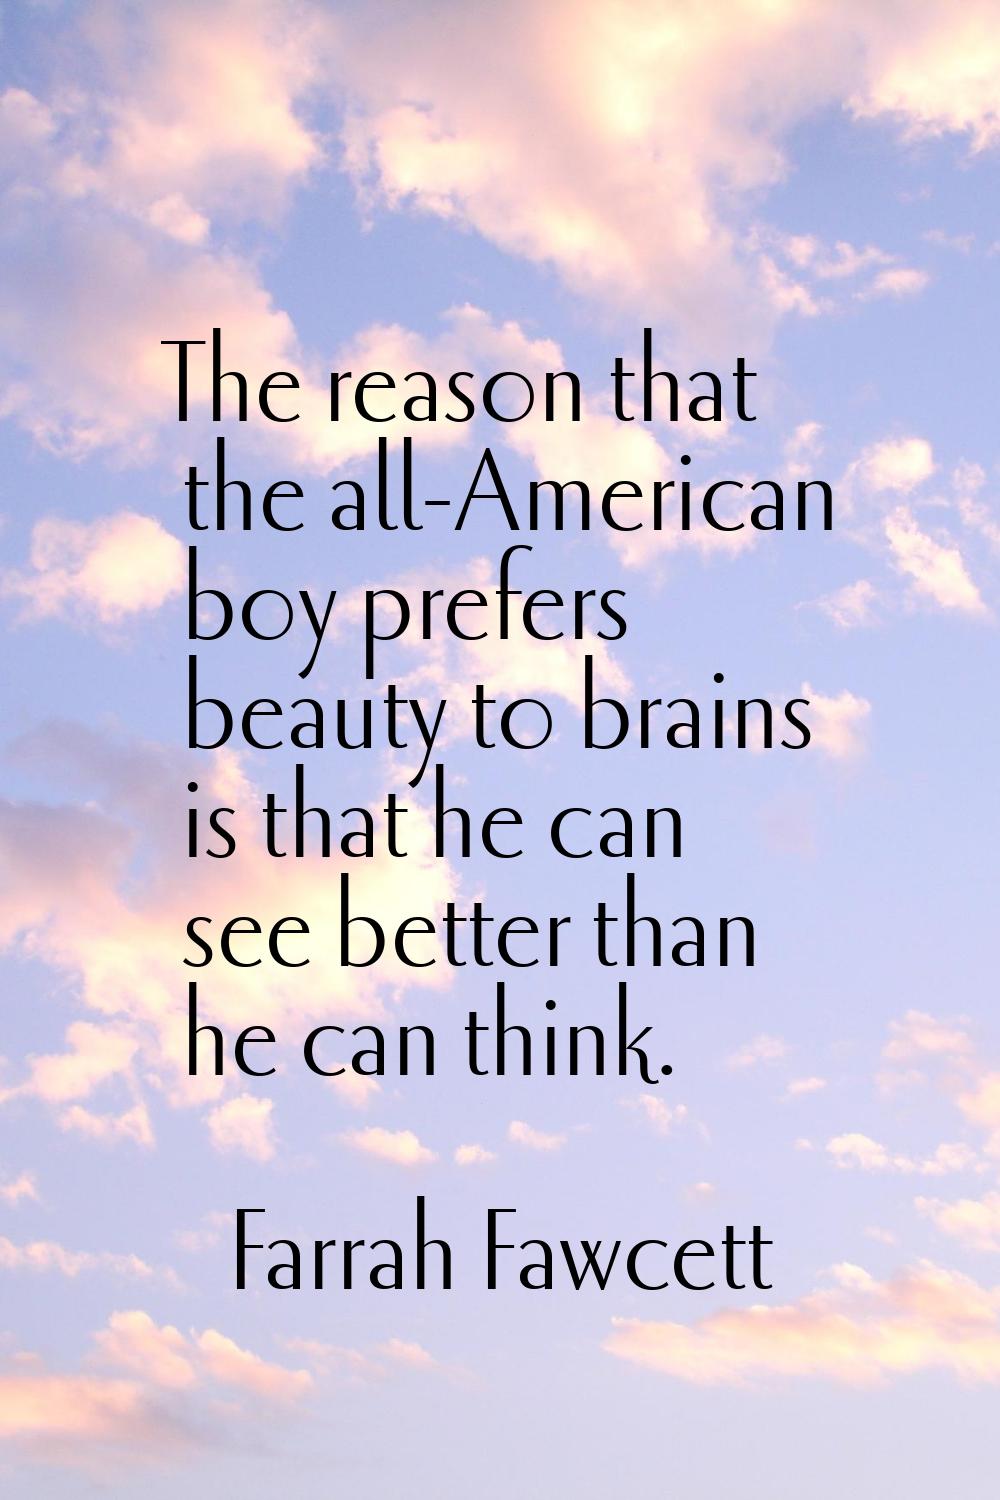 The reason that the all-American boy prefers beauty to brains is that he can see better than he can